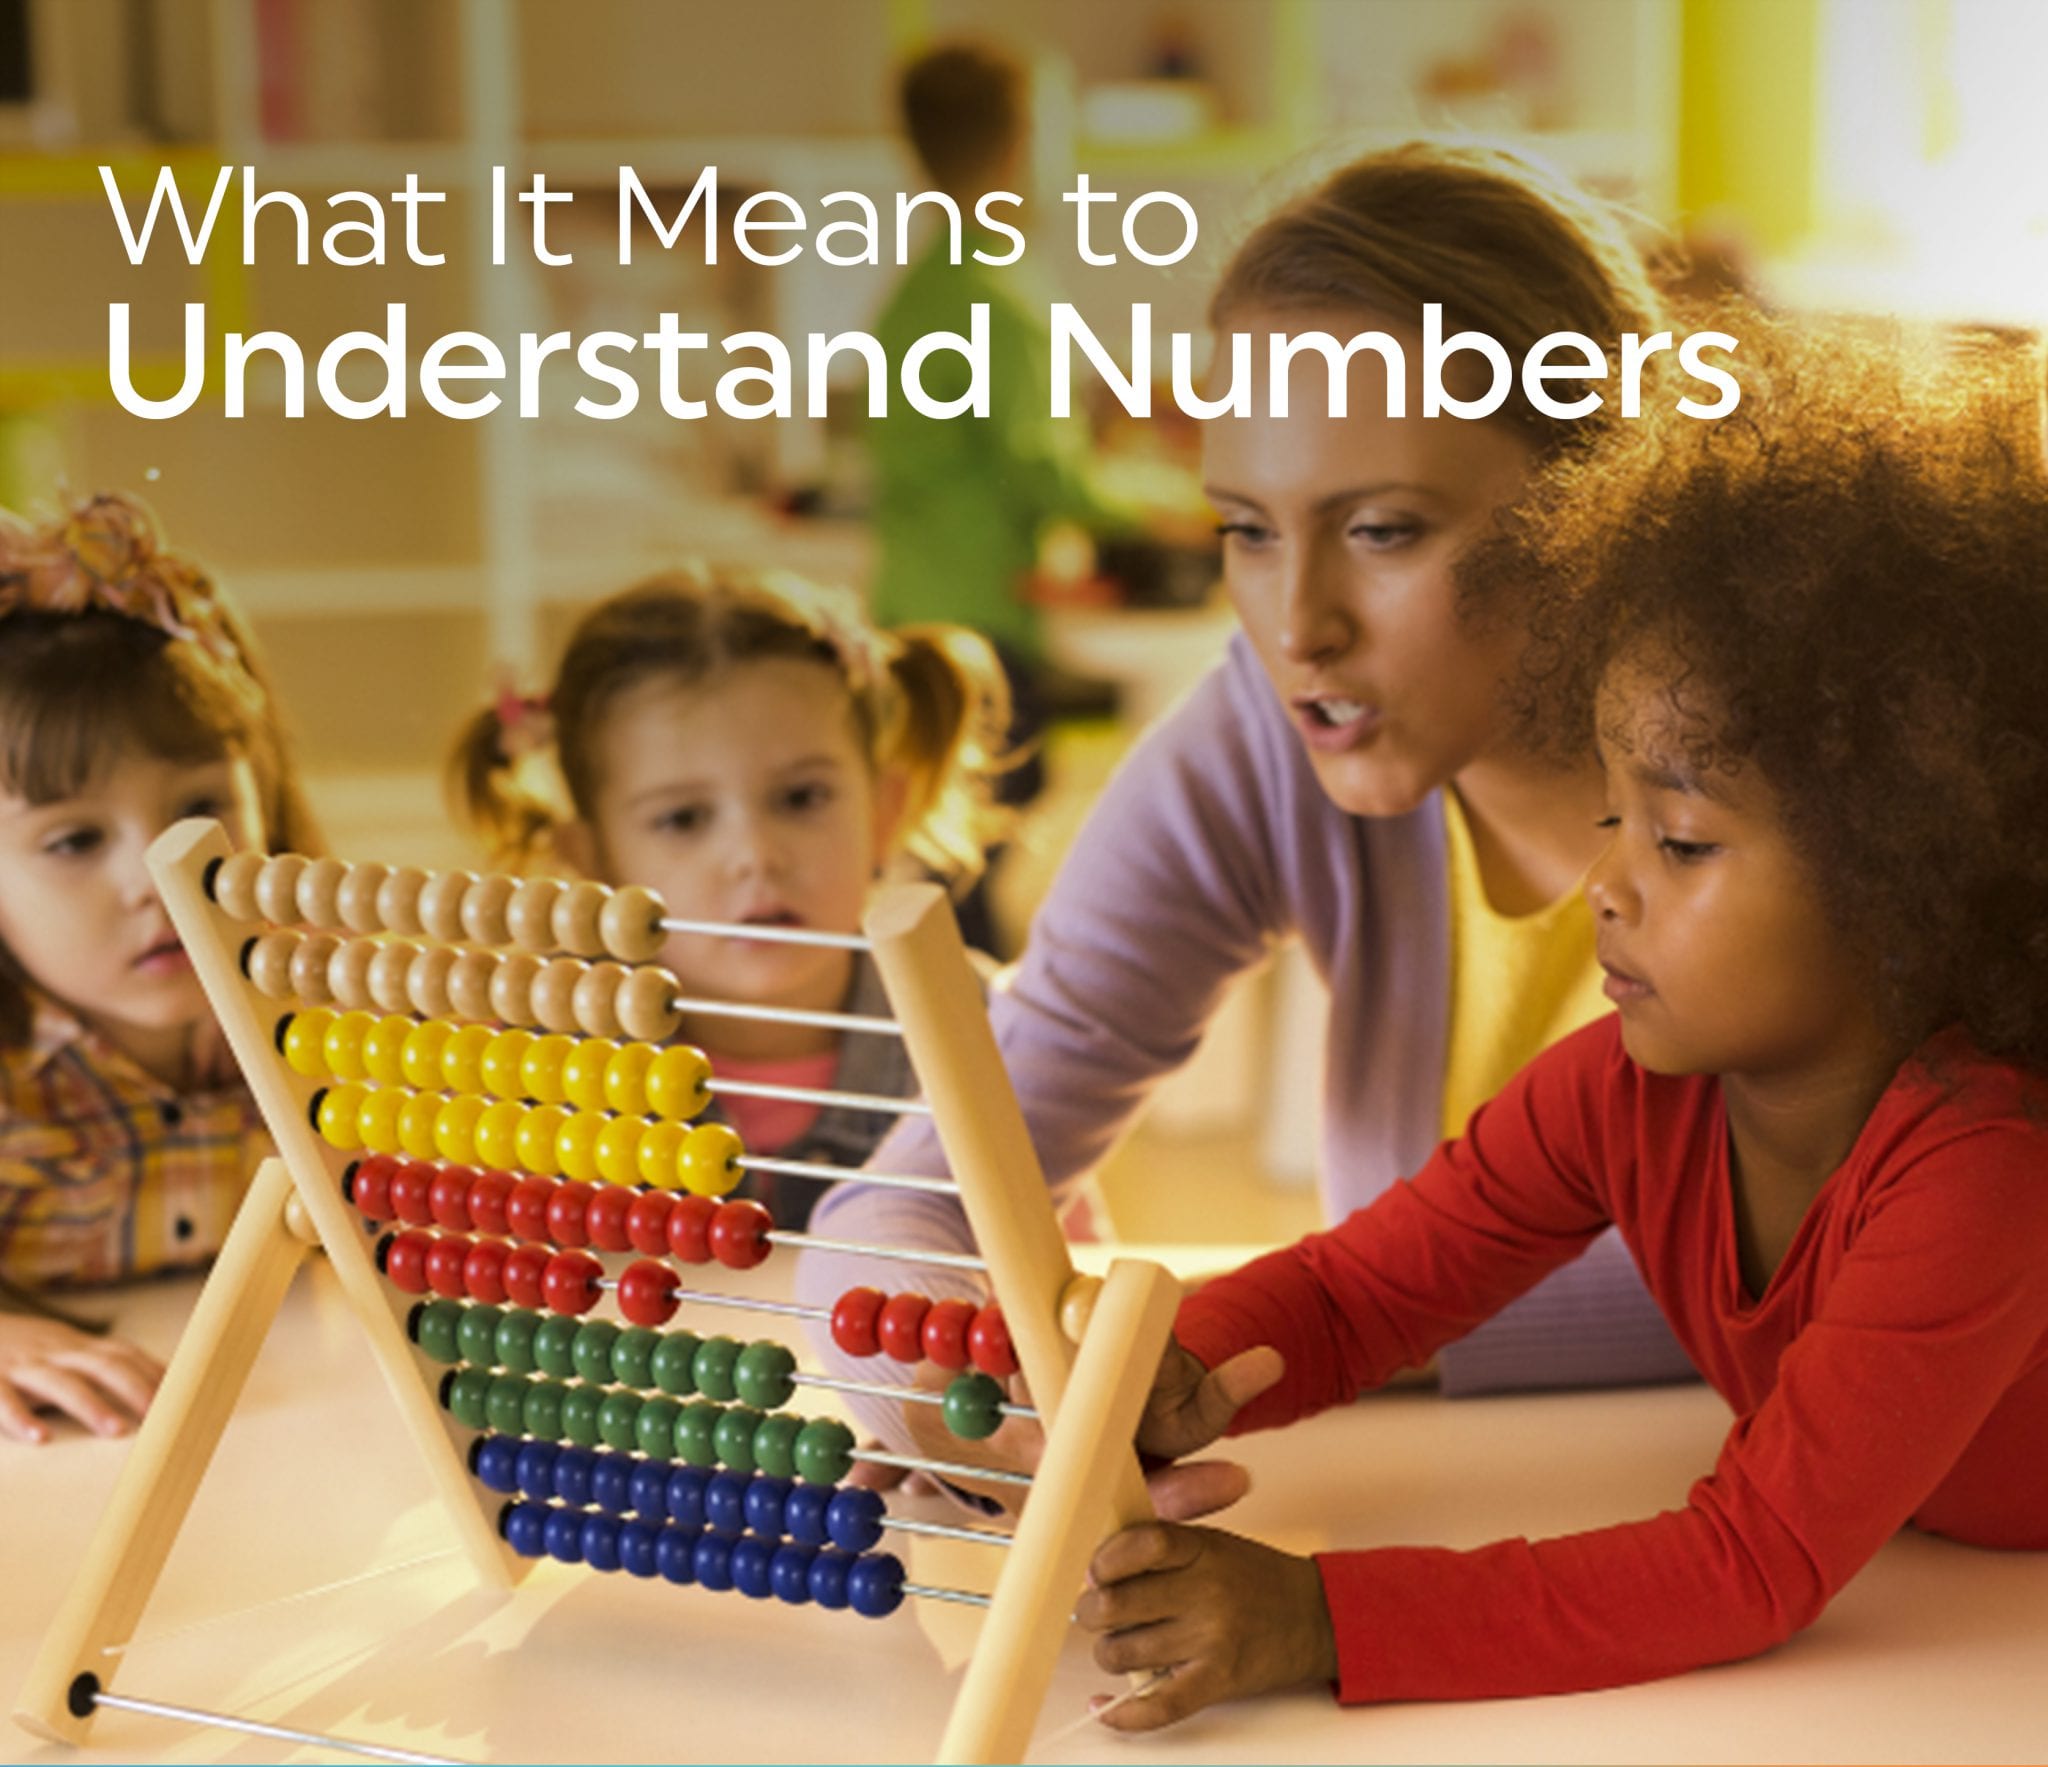 What it Means to Understand Numbers by Jennifer Van Zante